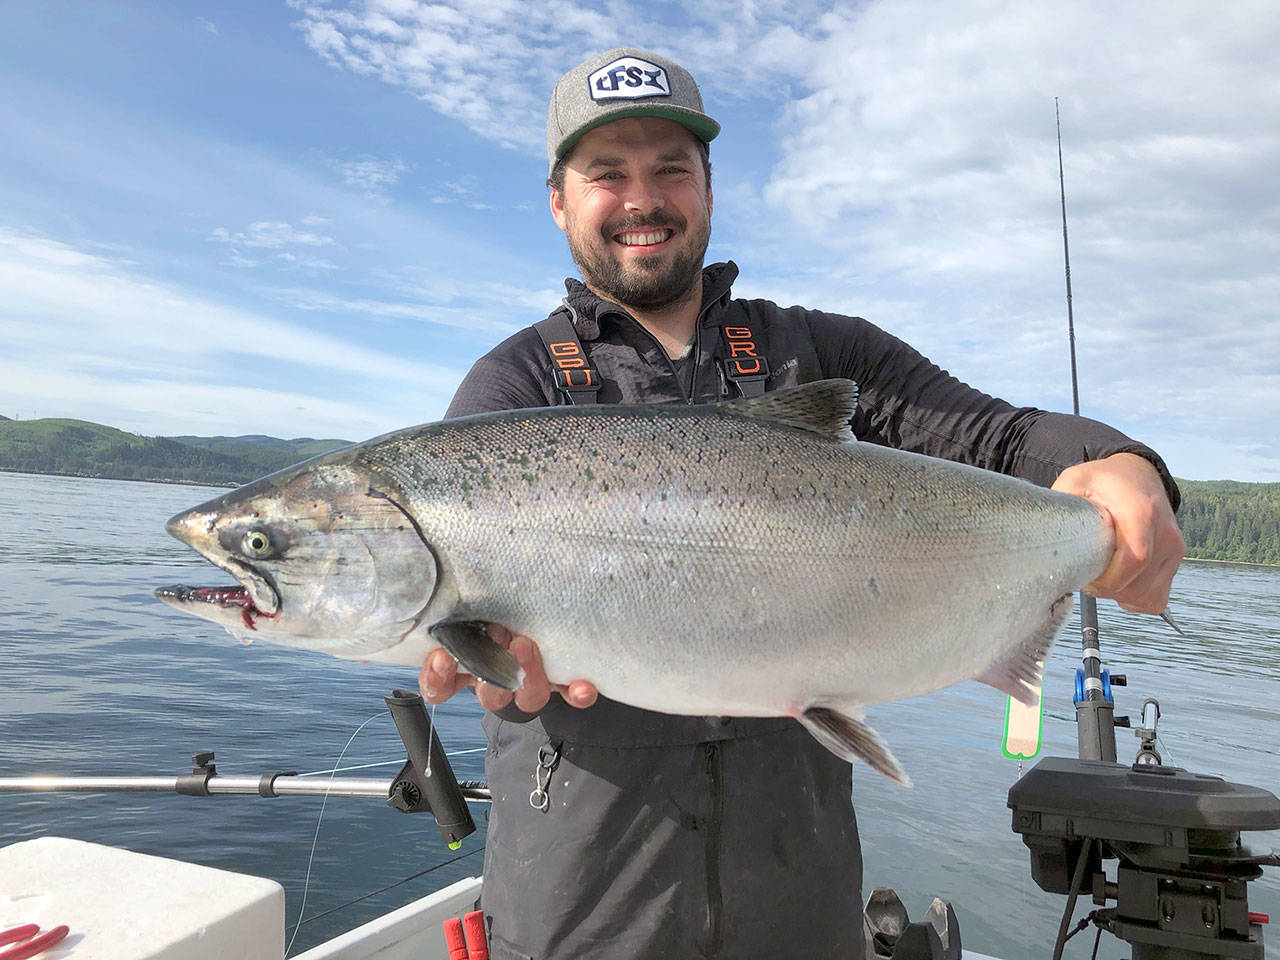 Starting Saturday, anglers fishing off of Neah Bay will have the chance to bring home a chinook like this one caught by Bellingham’s Tyler Dockins off Mushroom Rock during the 2020 salmon opener.